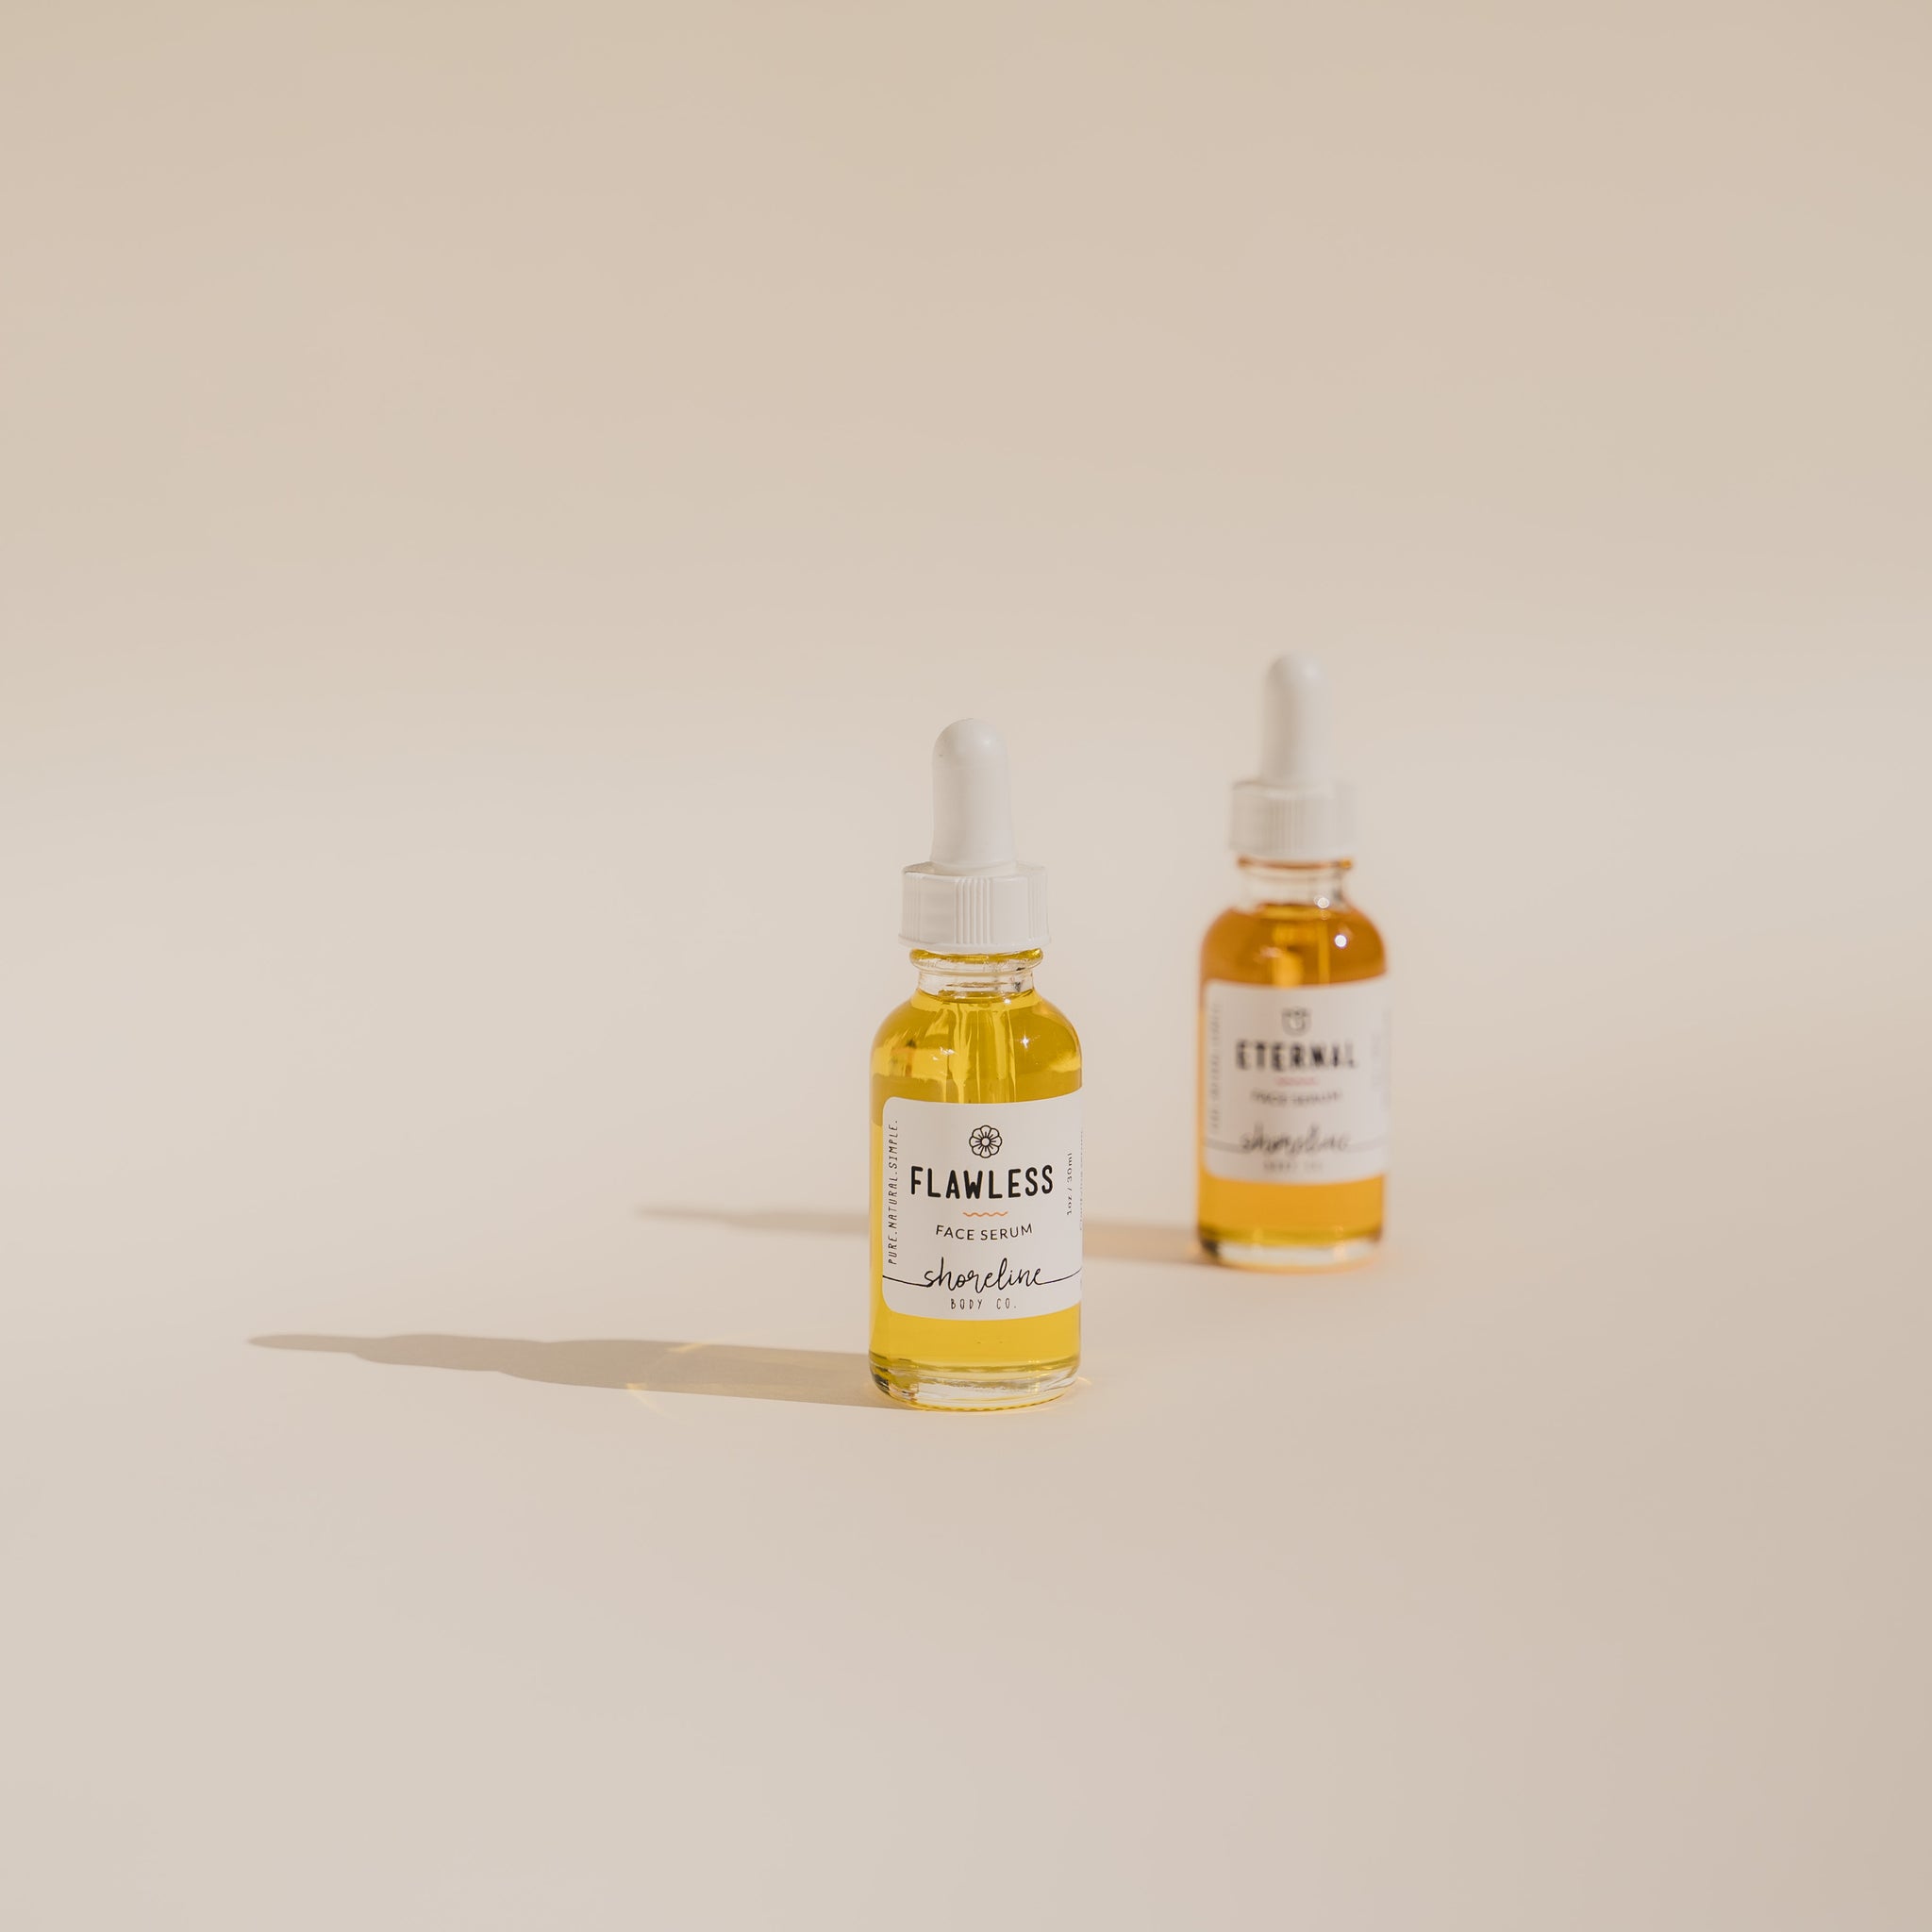 Eternal Serum and Flawless Serum pictured together. 